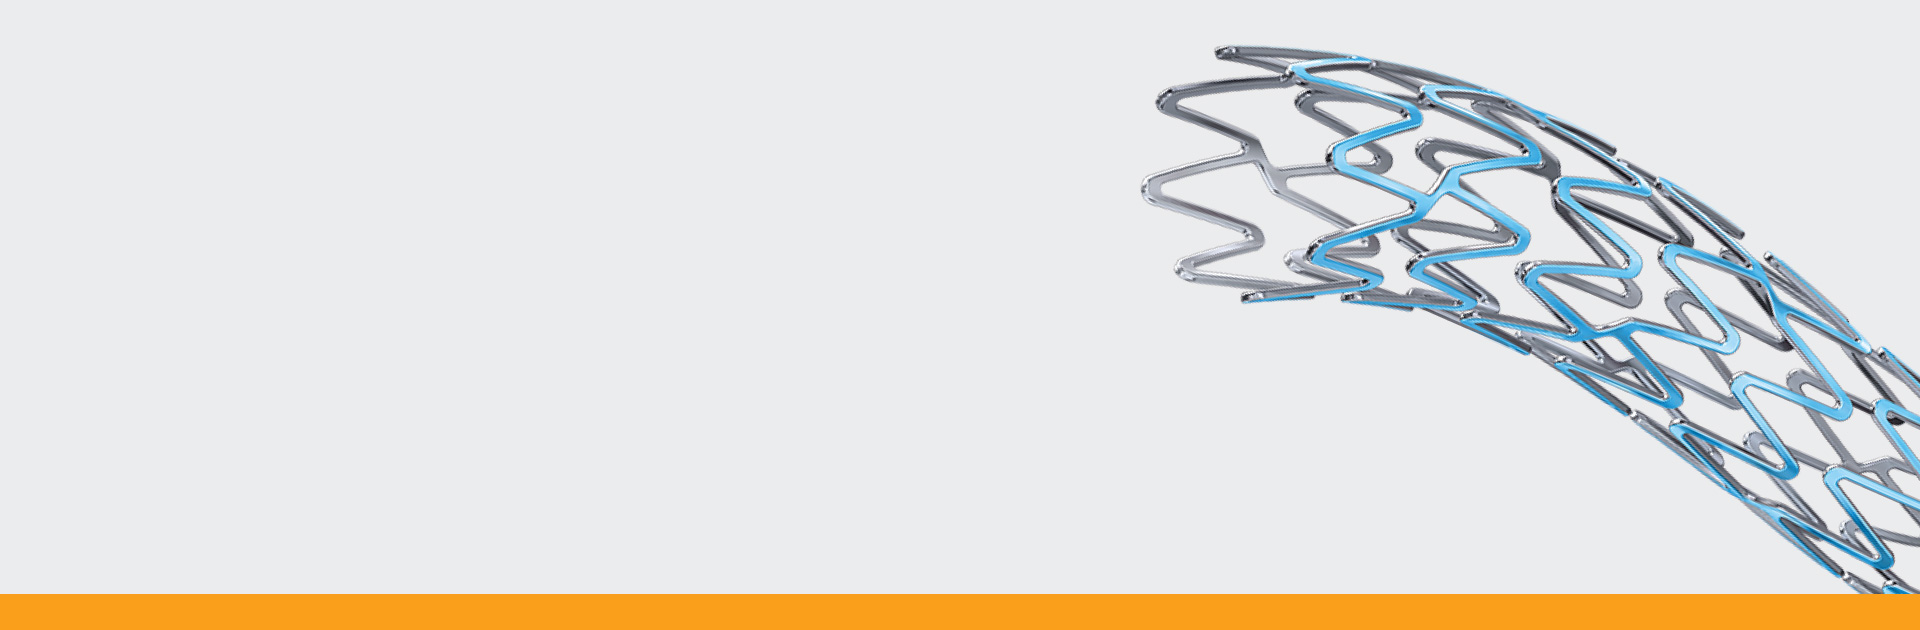 SYNERGY™ Bioabsorbable Polymer Stent: Designed to heal, the SYNERGY BP Stent has excellent clinical results. In 9 studies of more than 18,000 patients, SYNERGY BP Stent has shown outstanding safety with consistently low ST rates.